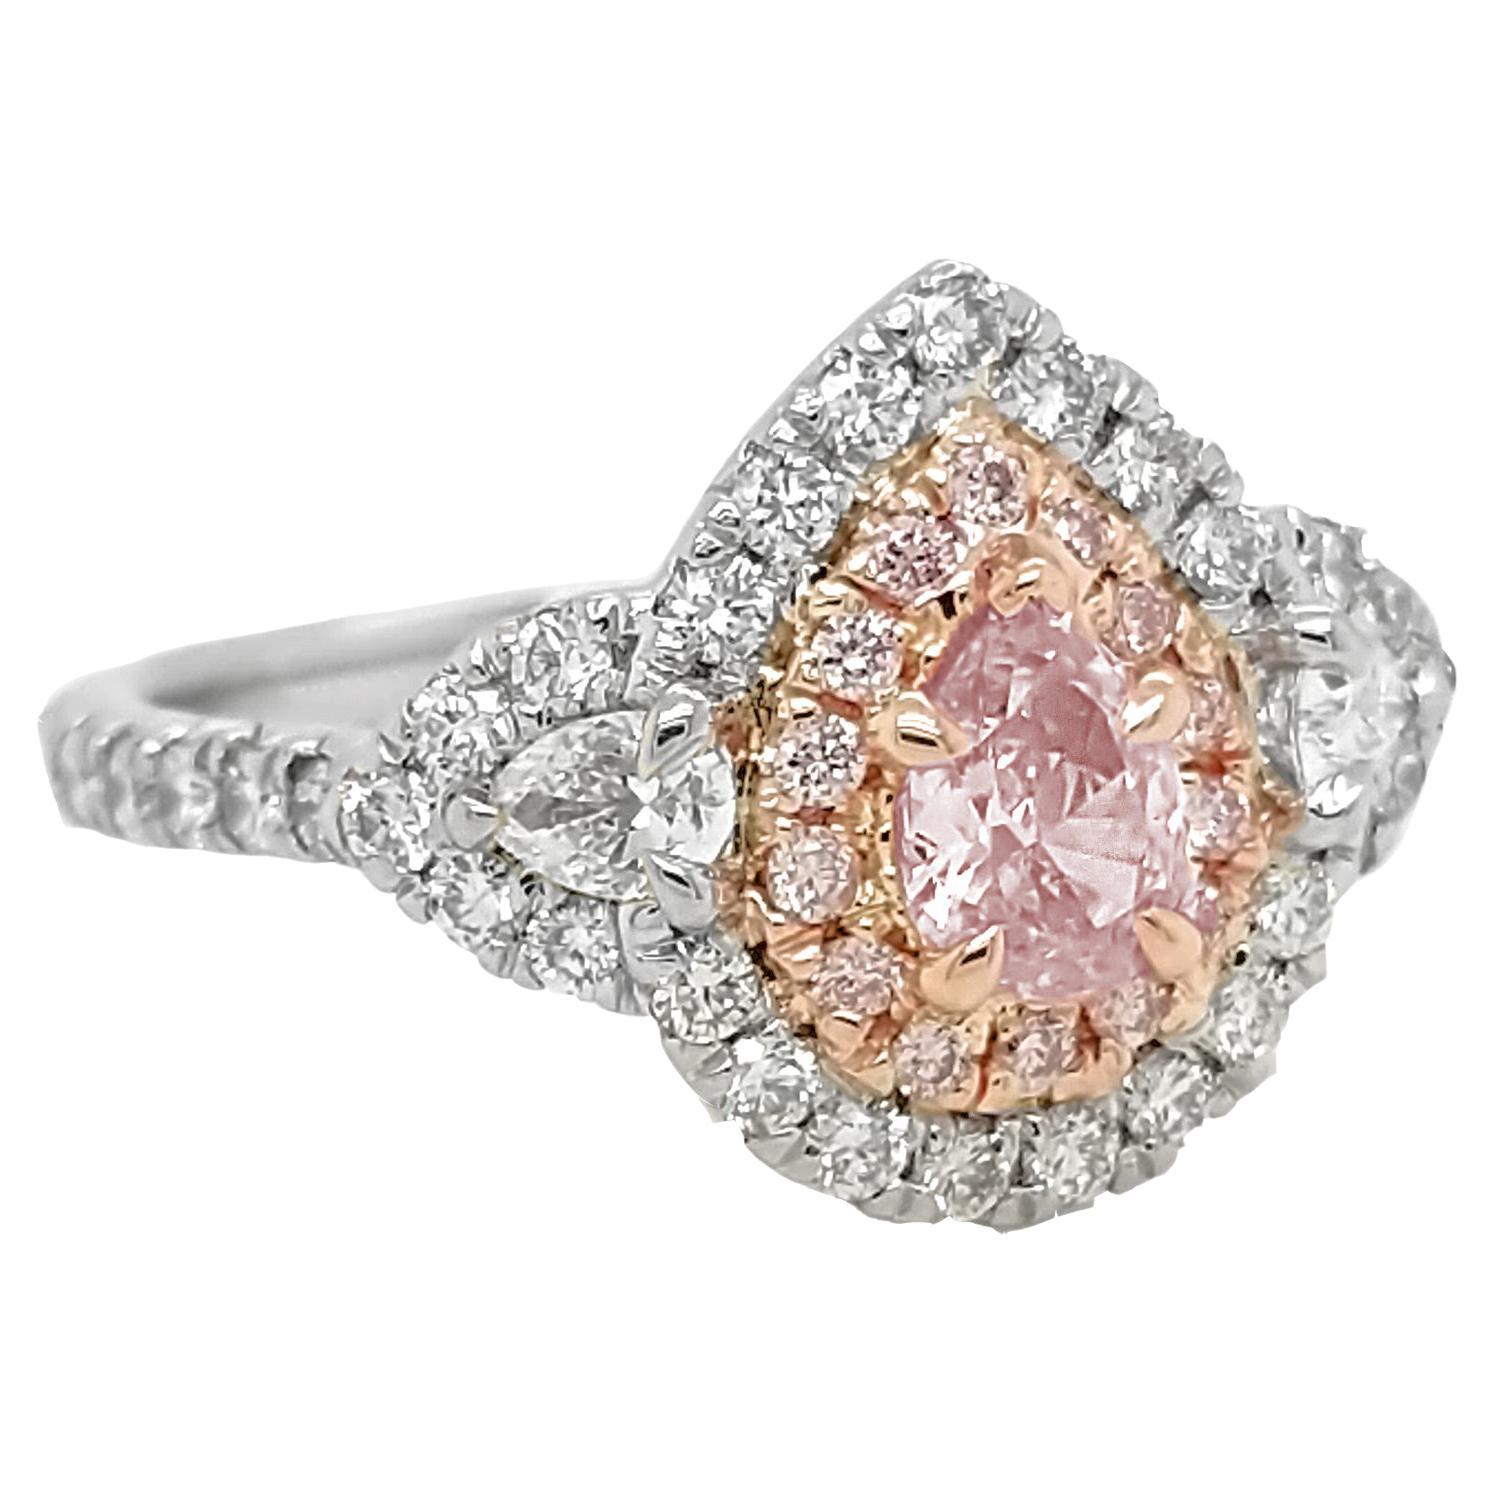 Make a statement with this stunning ring set with a 0.43 carat fancy pink diamond with GIA#:5191982650. The ring also features 0.18 carats of pink melee, 2 pear shapes weighing .60 carats, F/VS, and .87 carats of white melee, adding even more